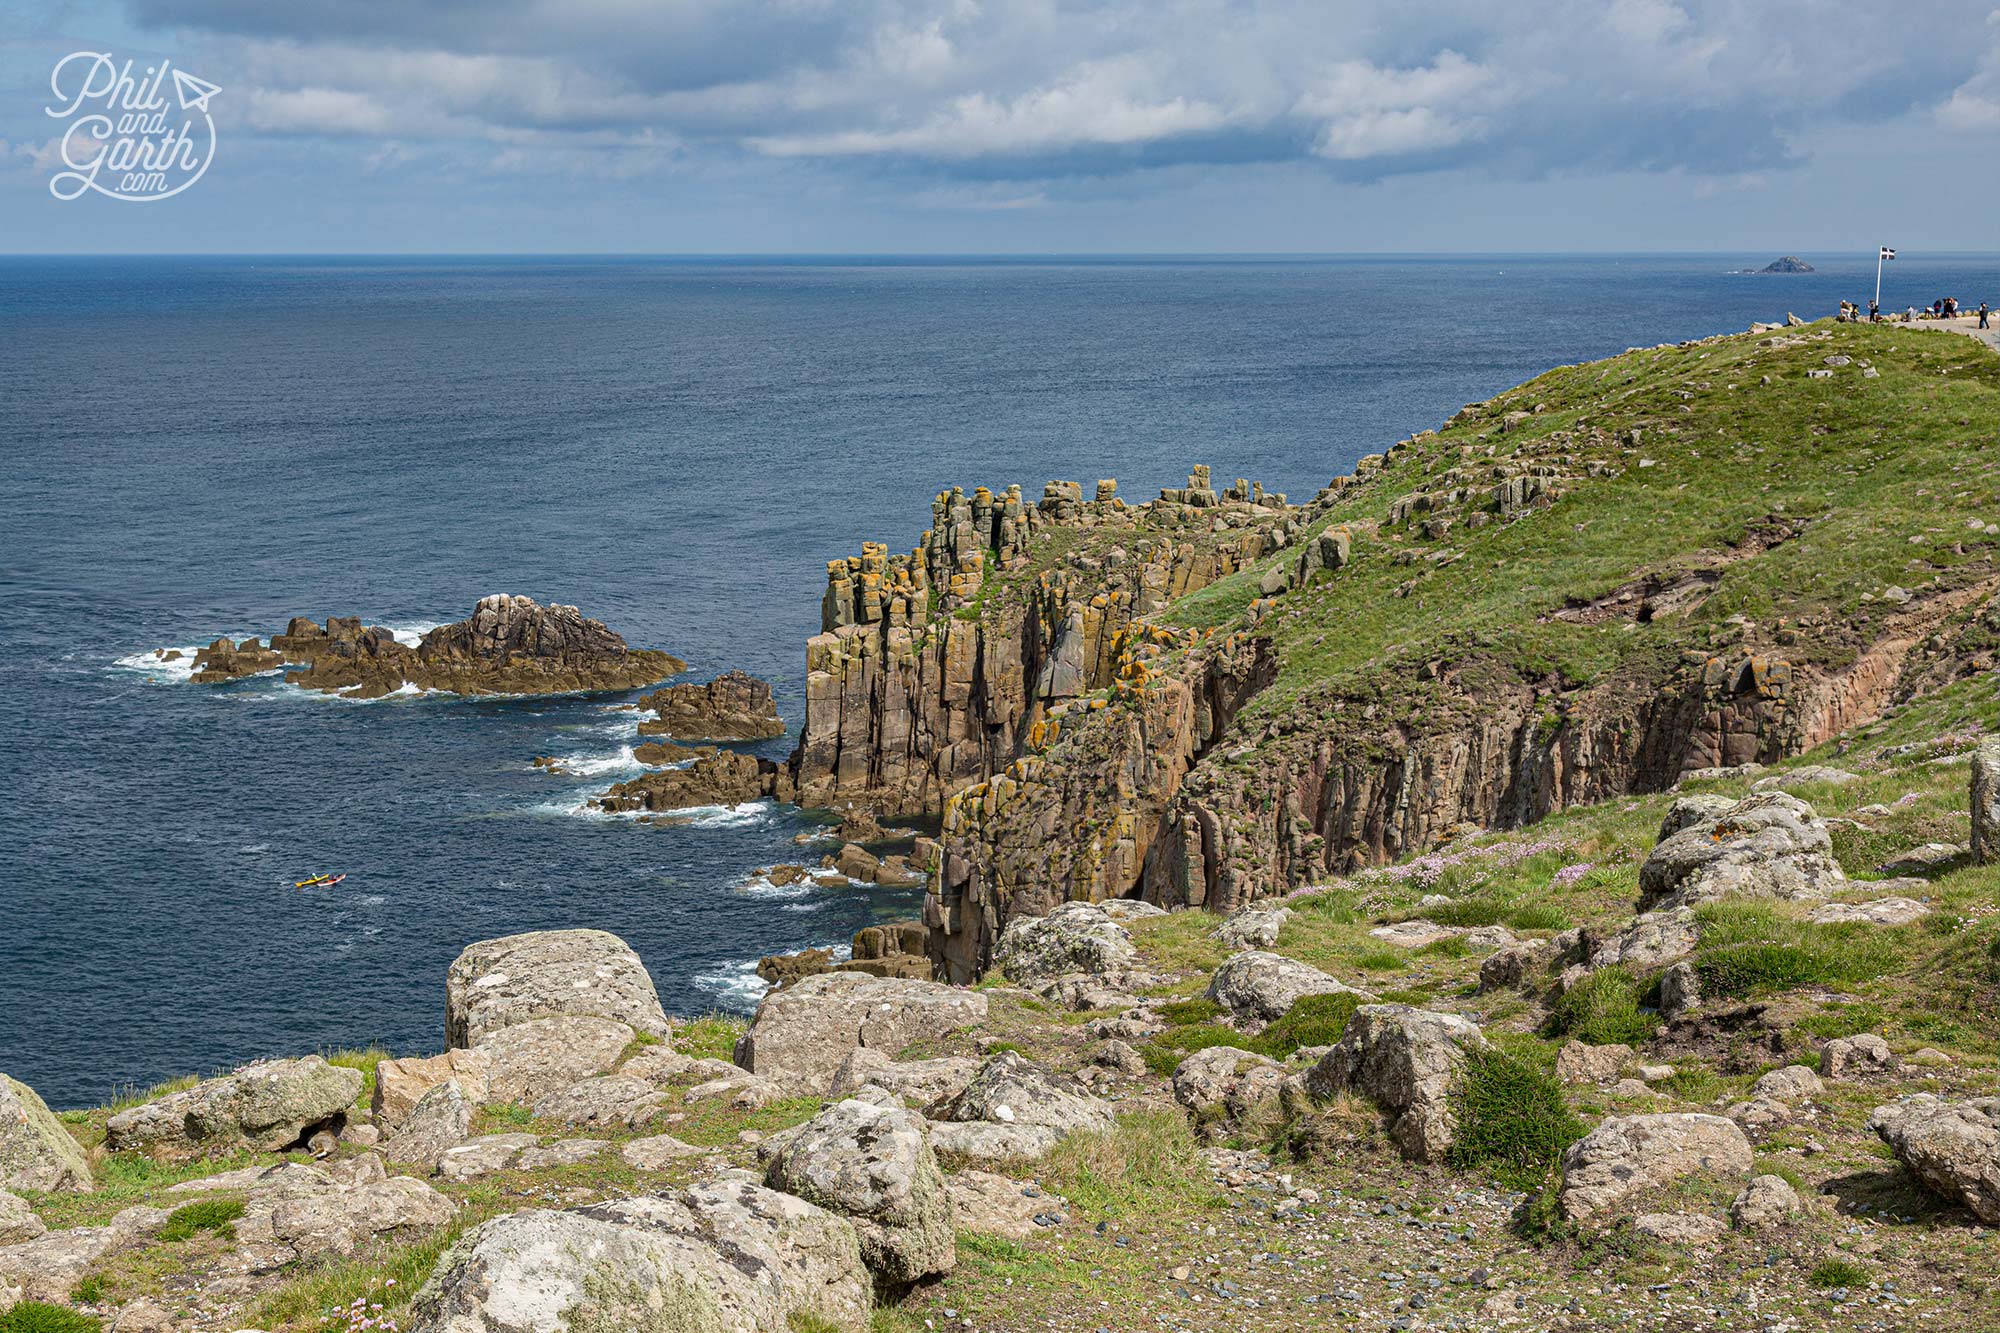 View of the rocky cliffs out to the Celtic Sea - part of the Atlantic Ocean